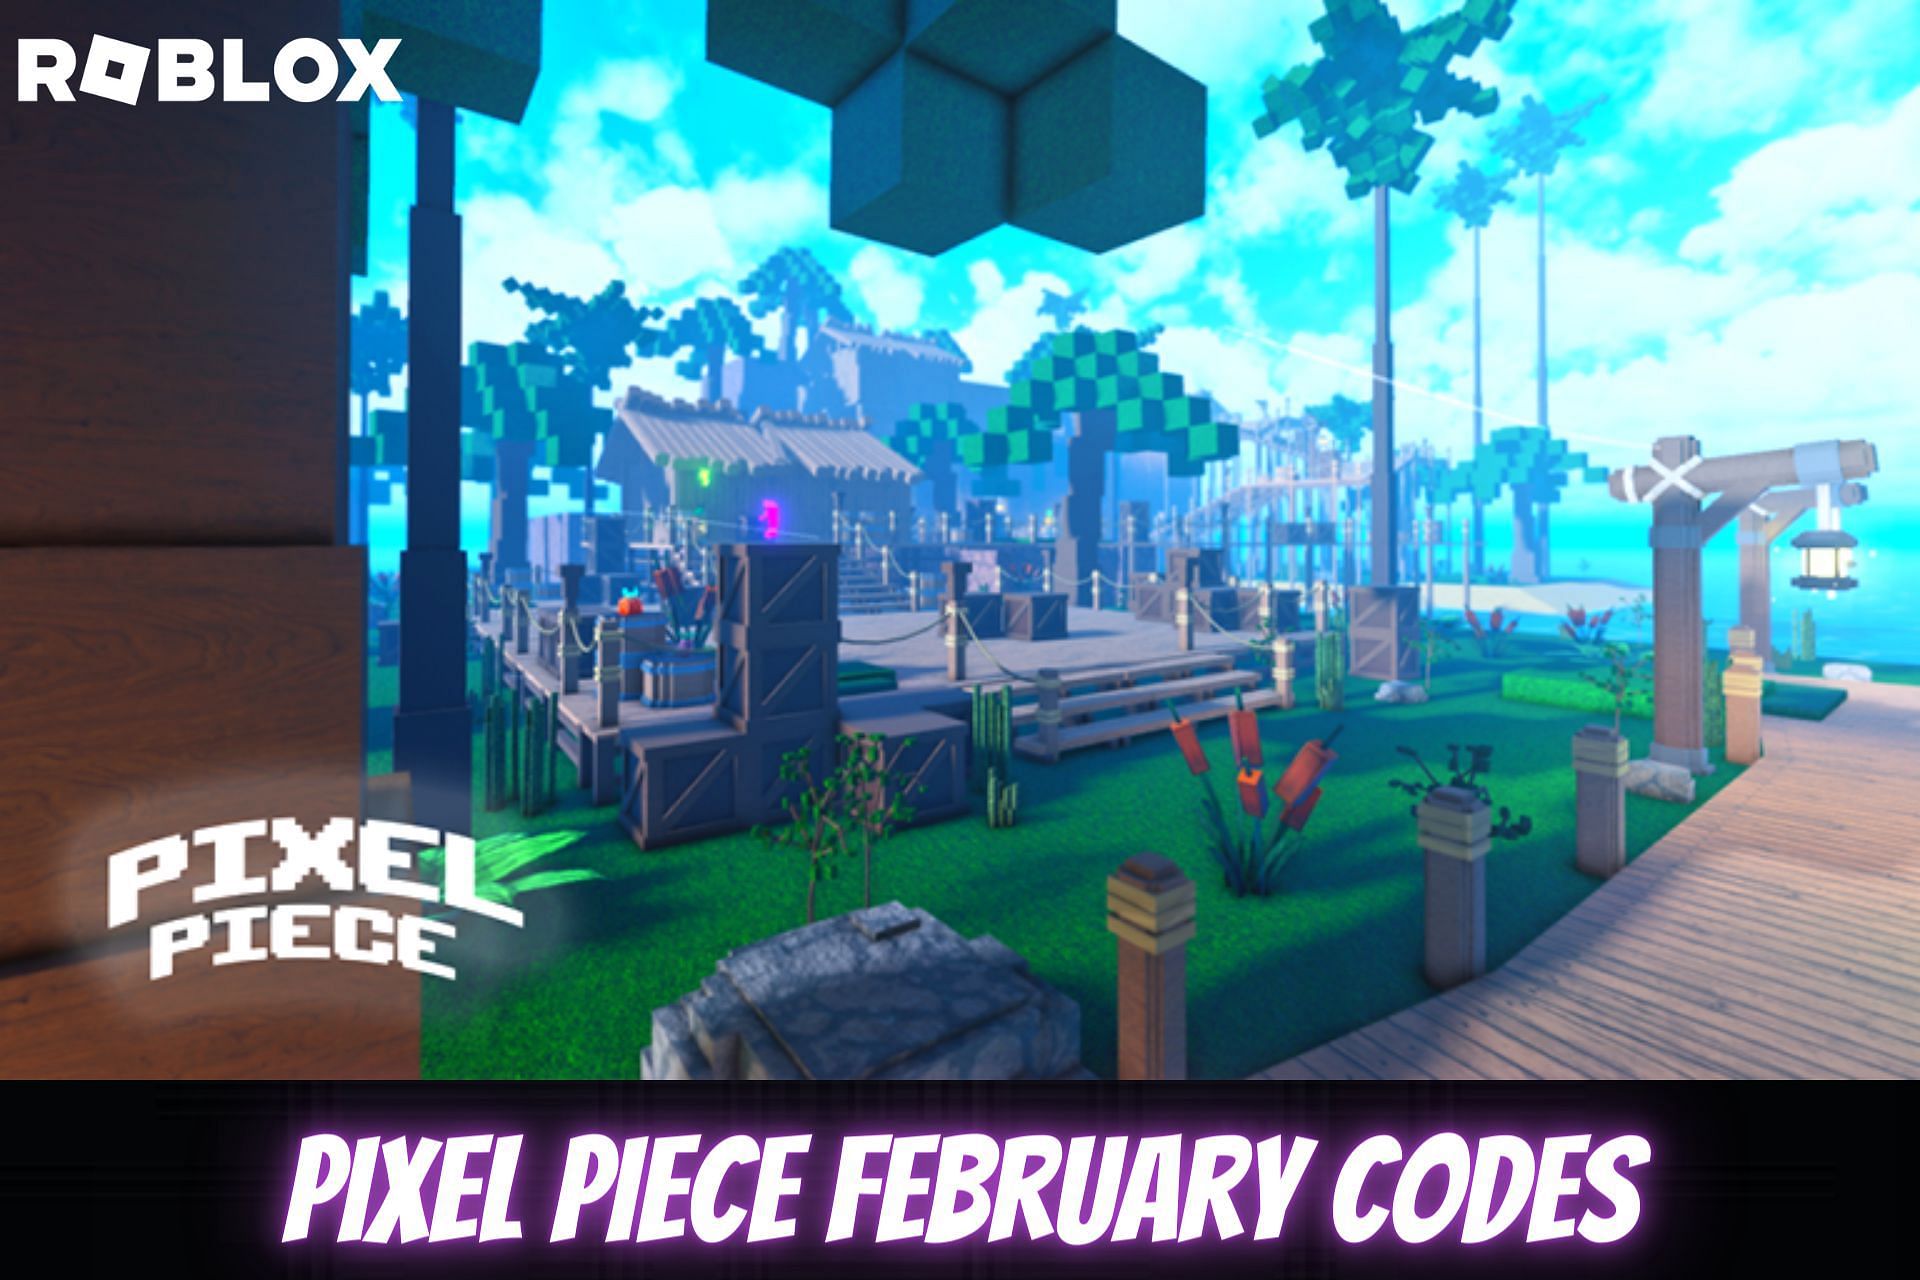 Pixel Piece codes (February 2023): How to redeem them? • TechBriefly